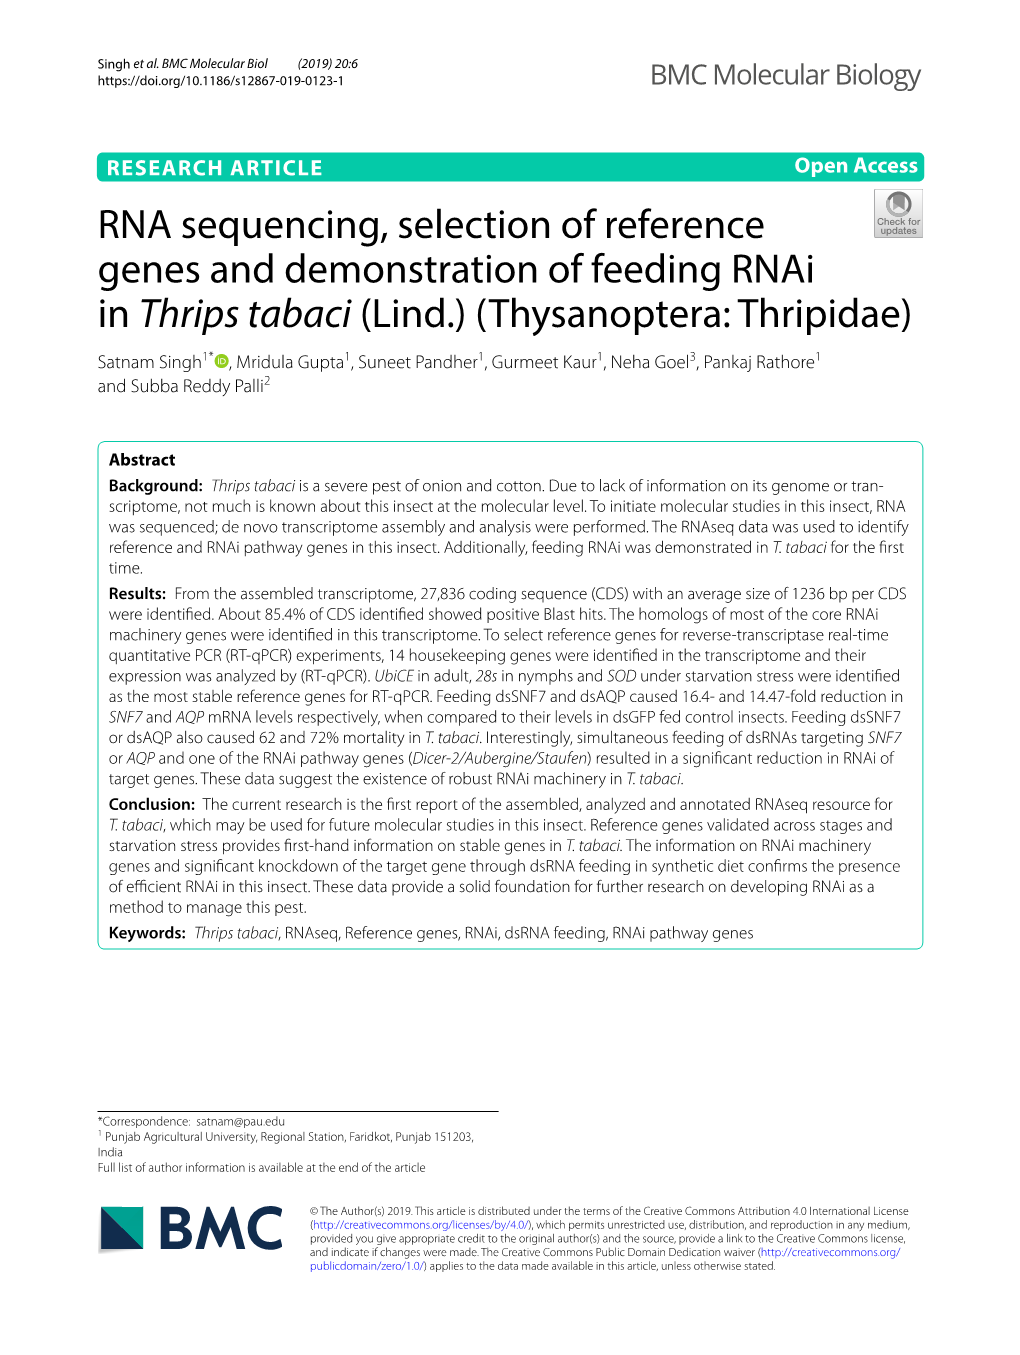 RNA Sequencing, Selection of Reference Genes and Demonstration